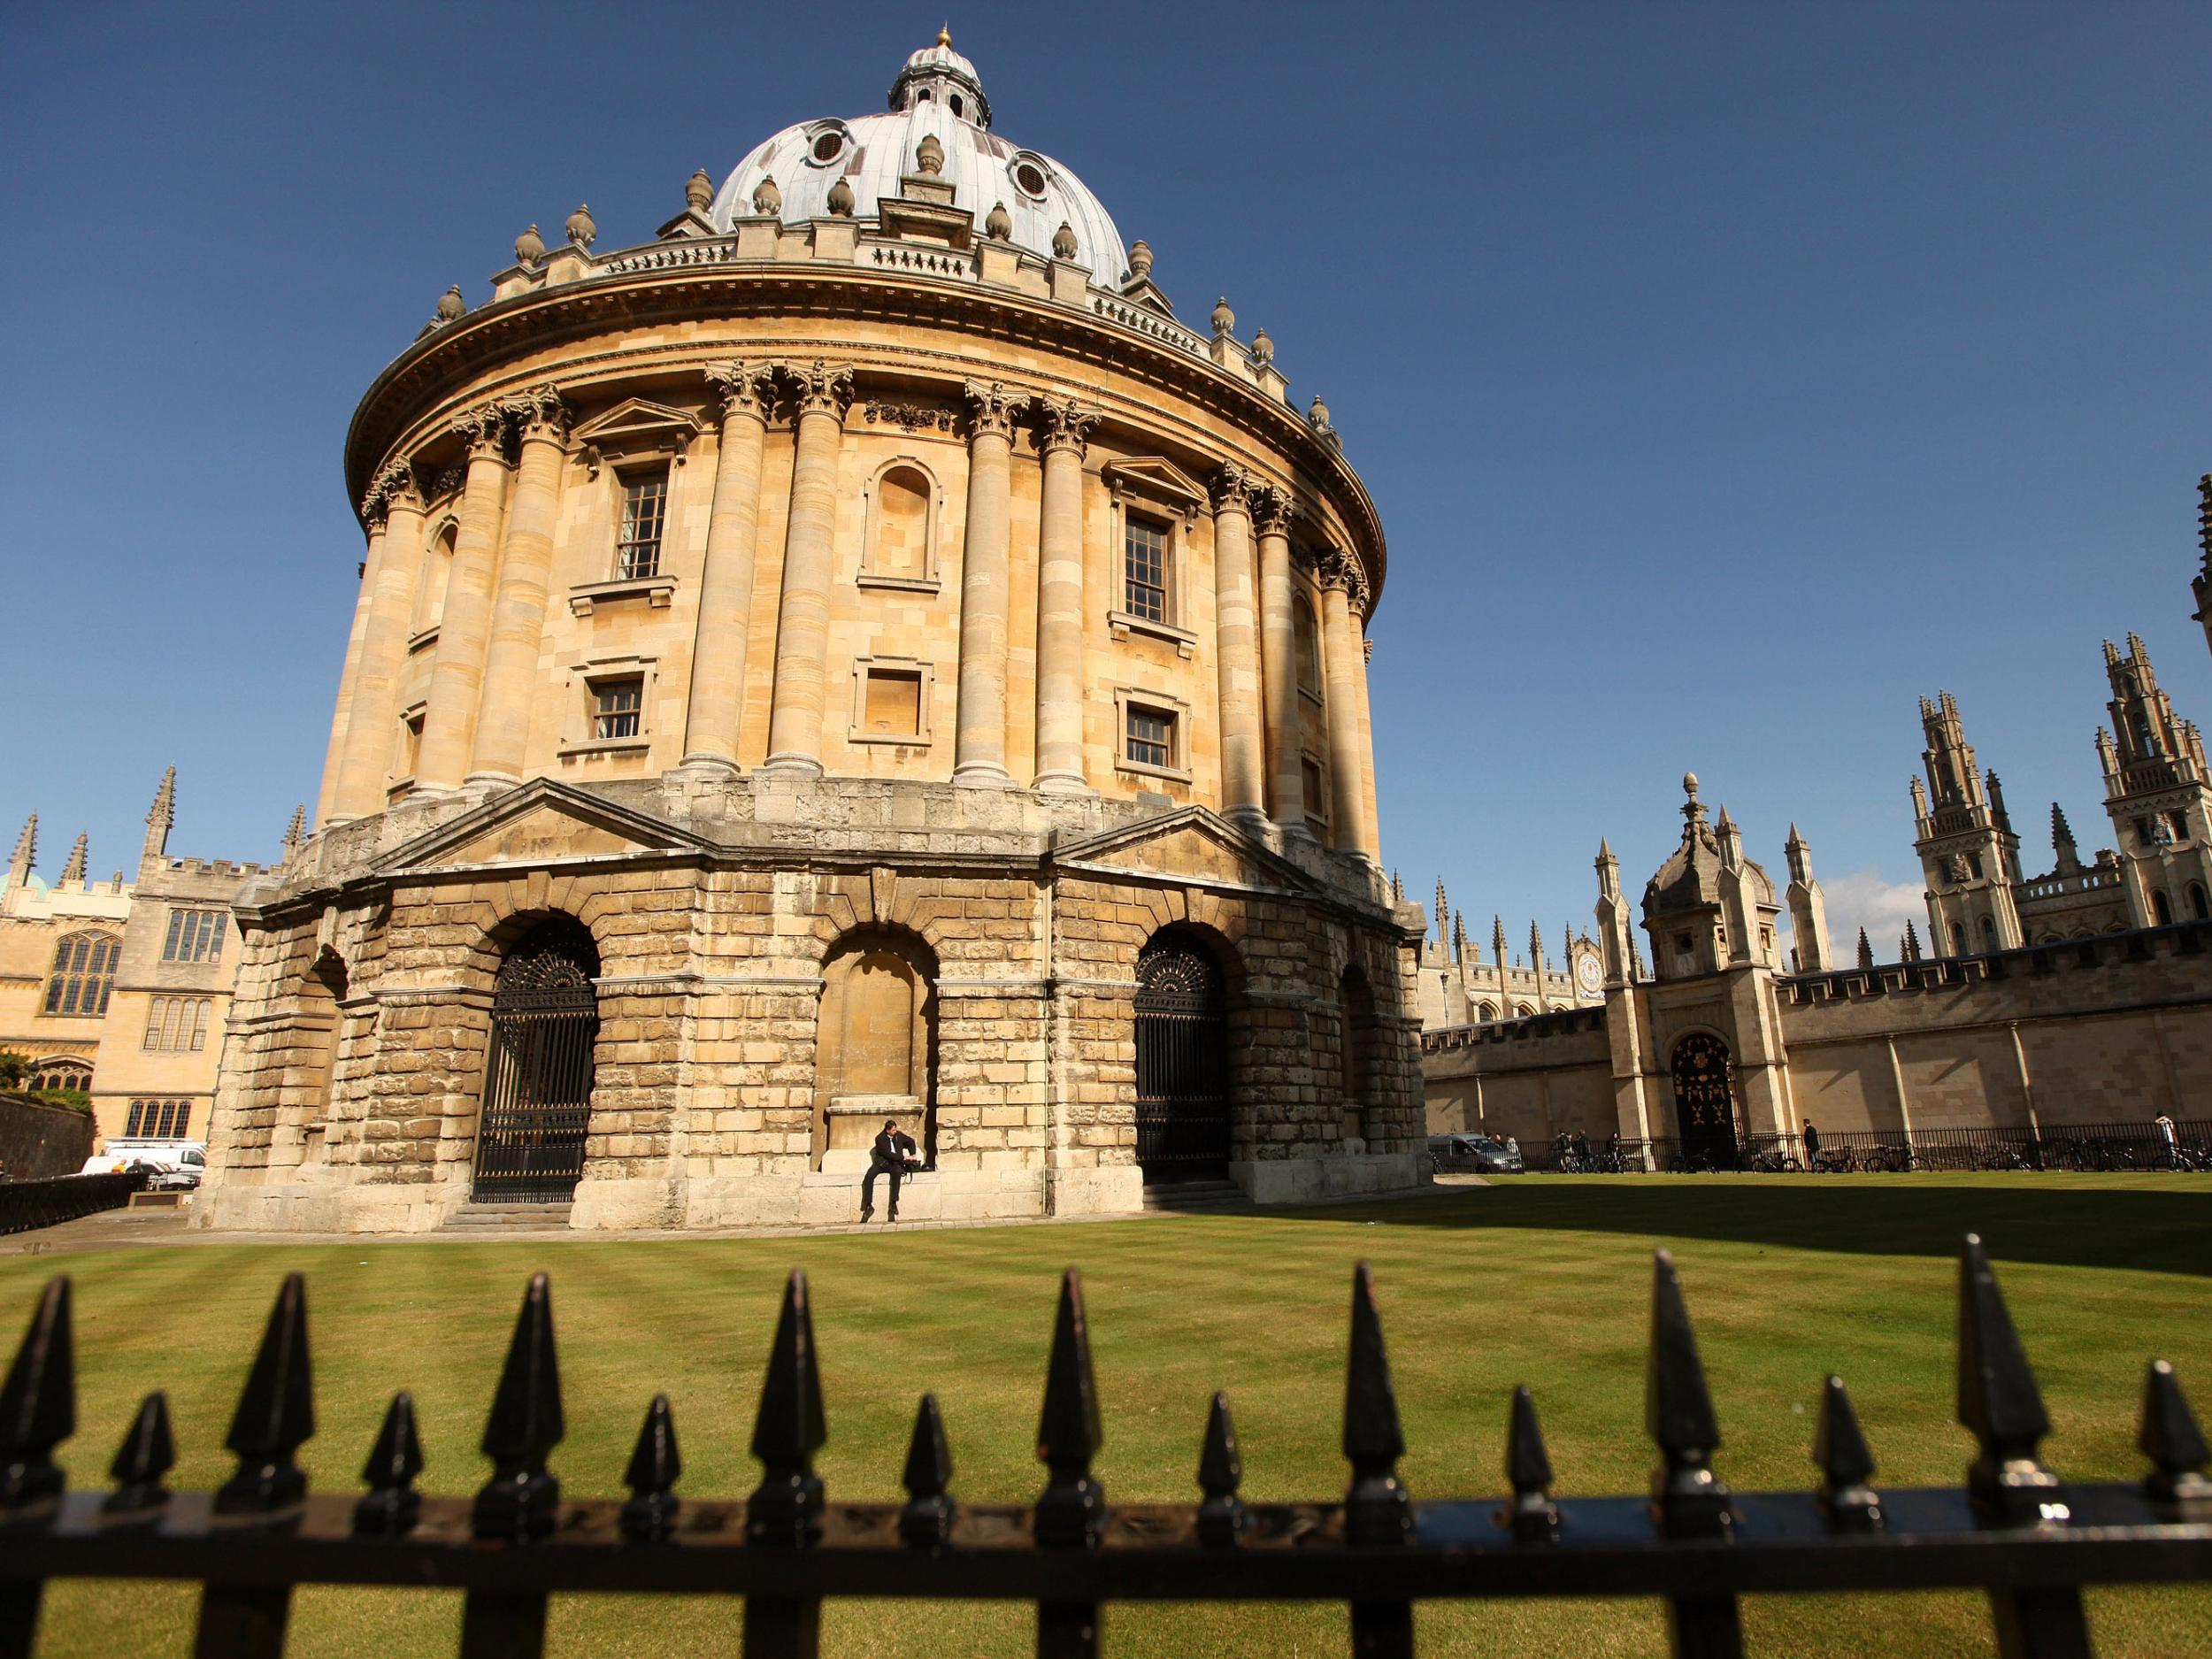 Oxford University has been crowned the best university in the world